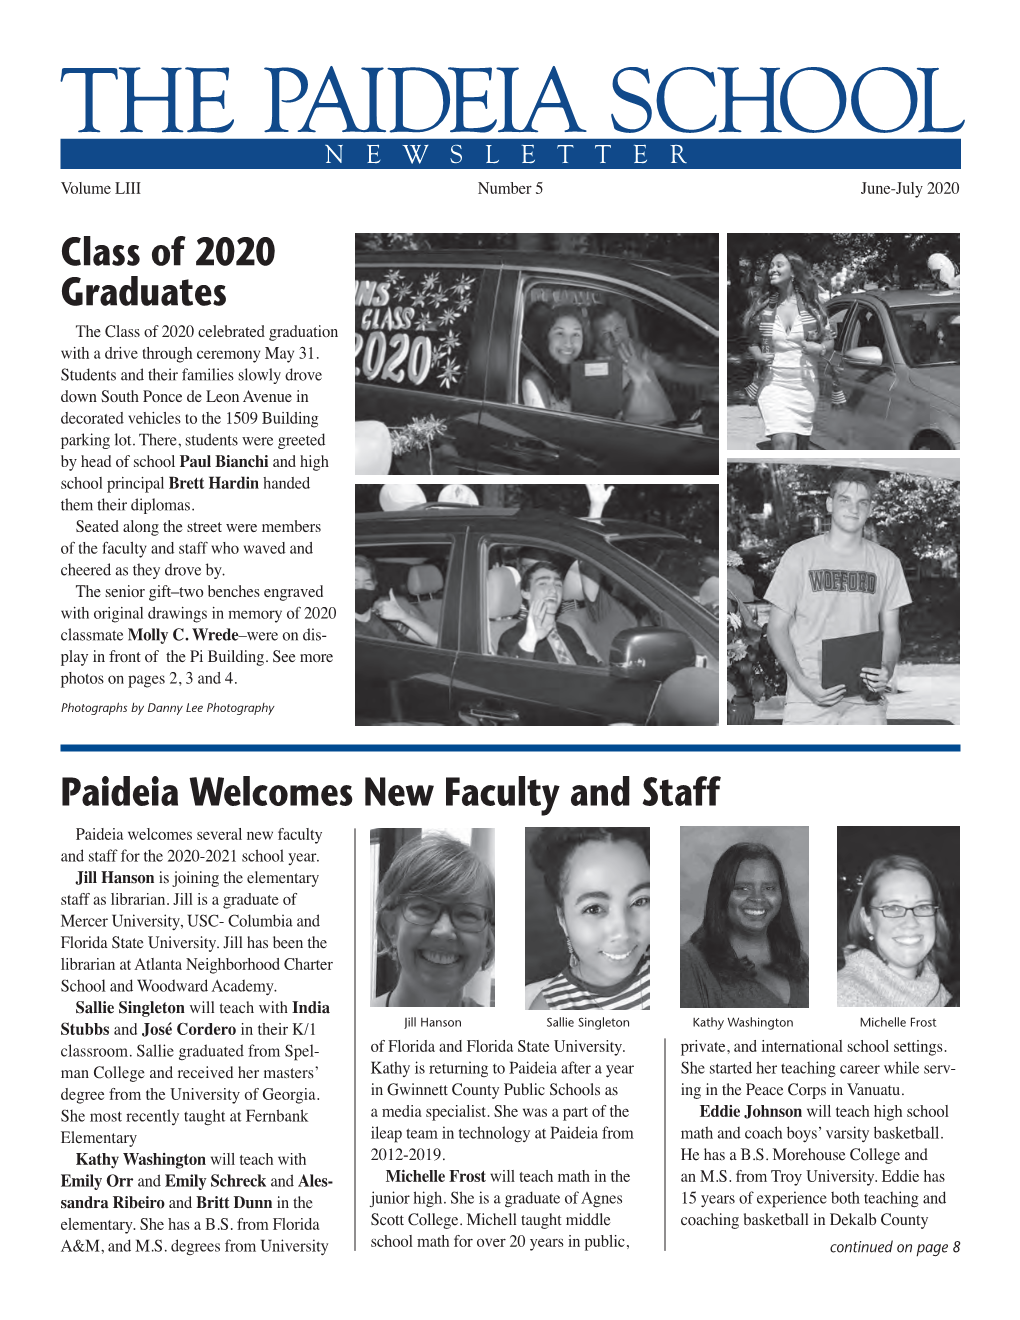 June-July 2020 Class of 2020 Graduates the Class of 2020 Celebrated Graduation with a Drive Through Ceremony May 31